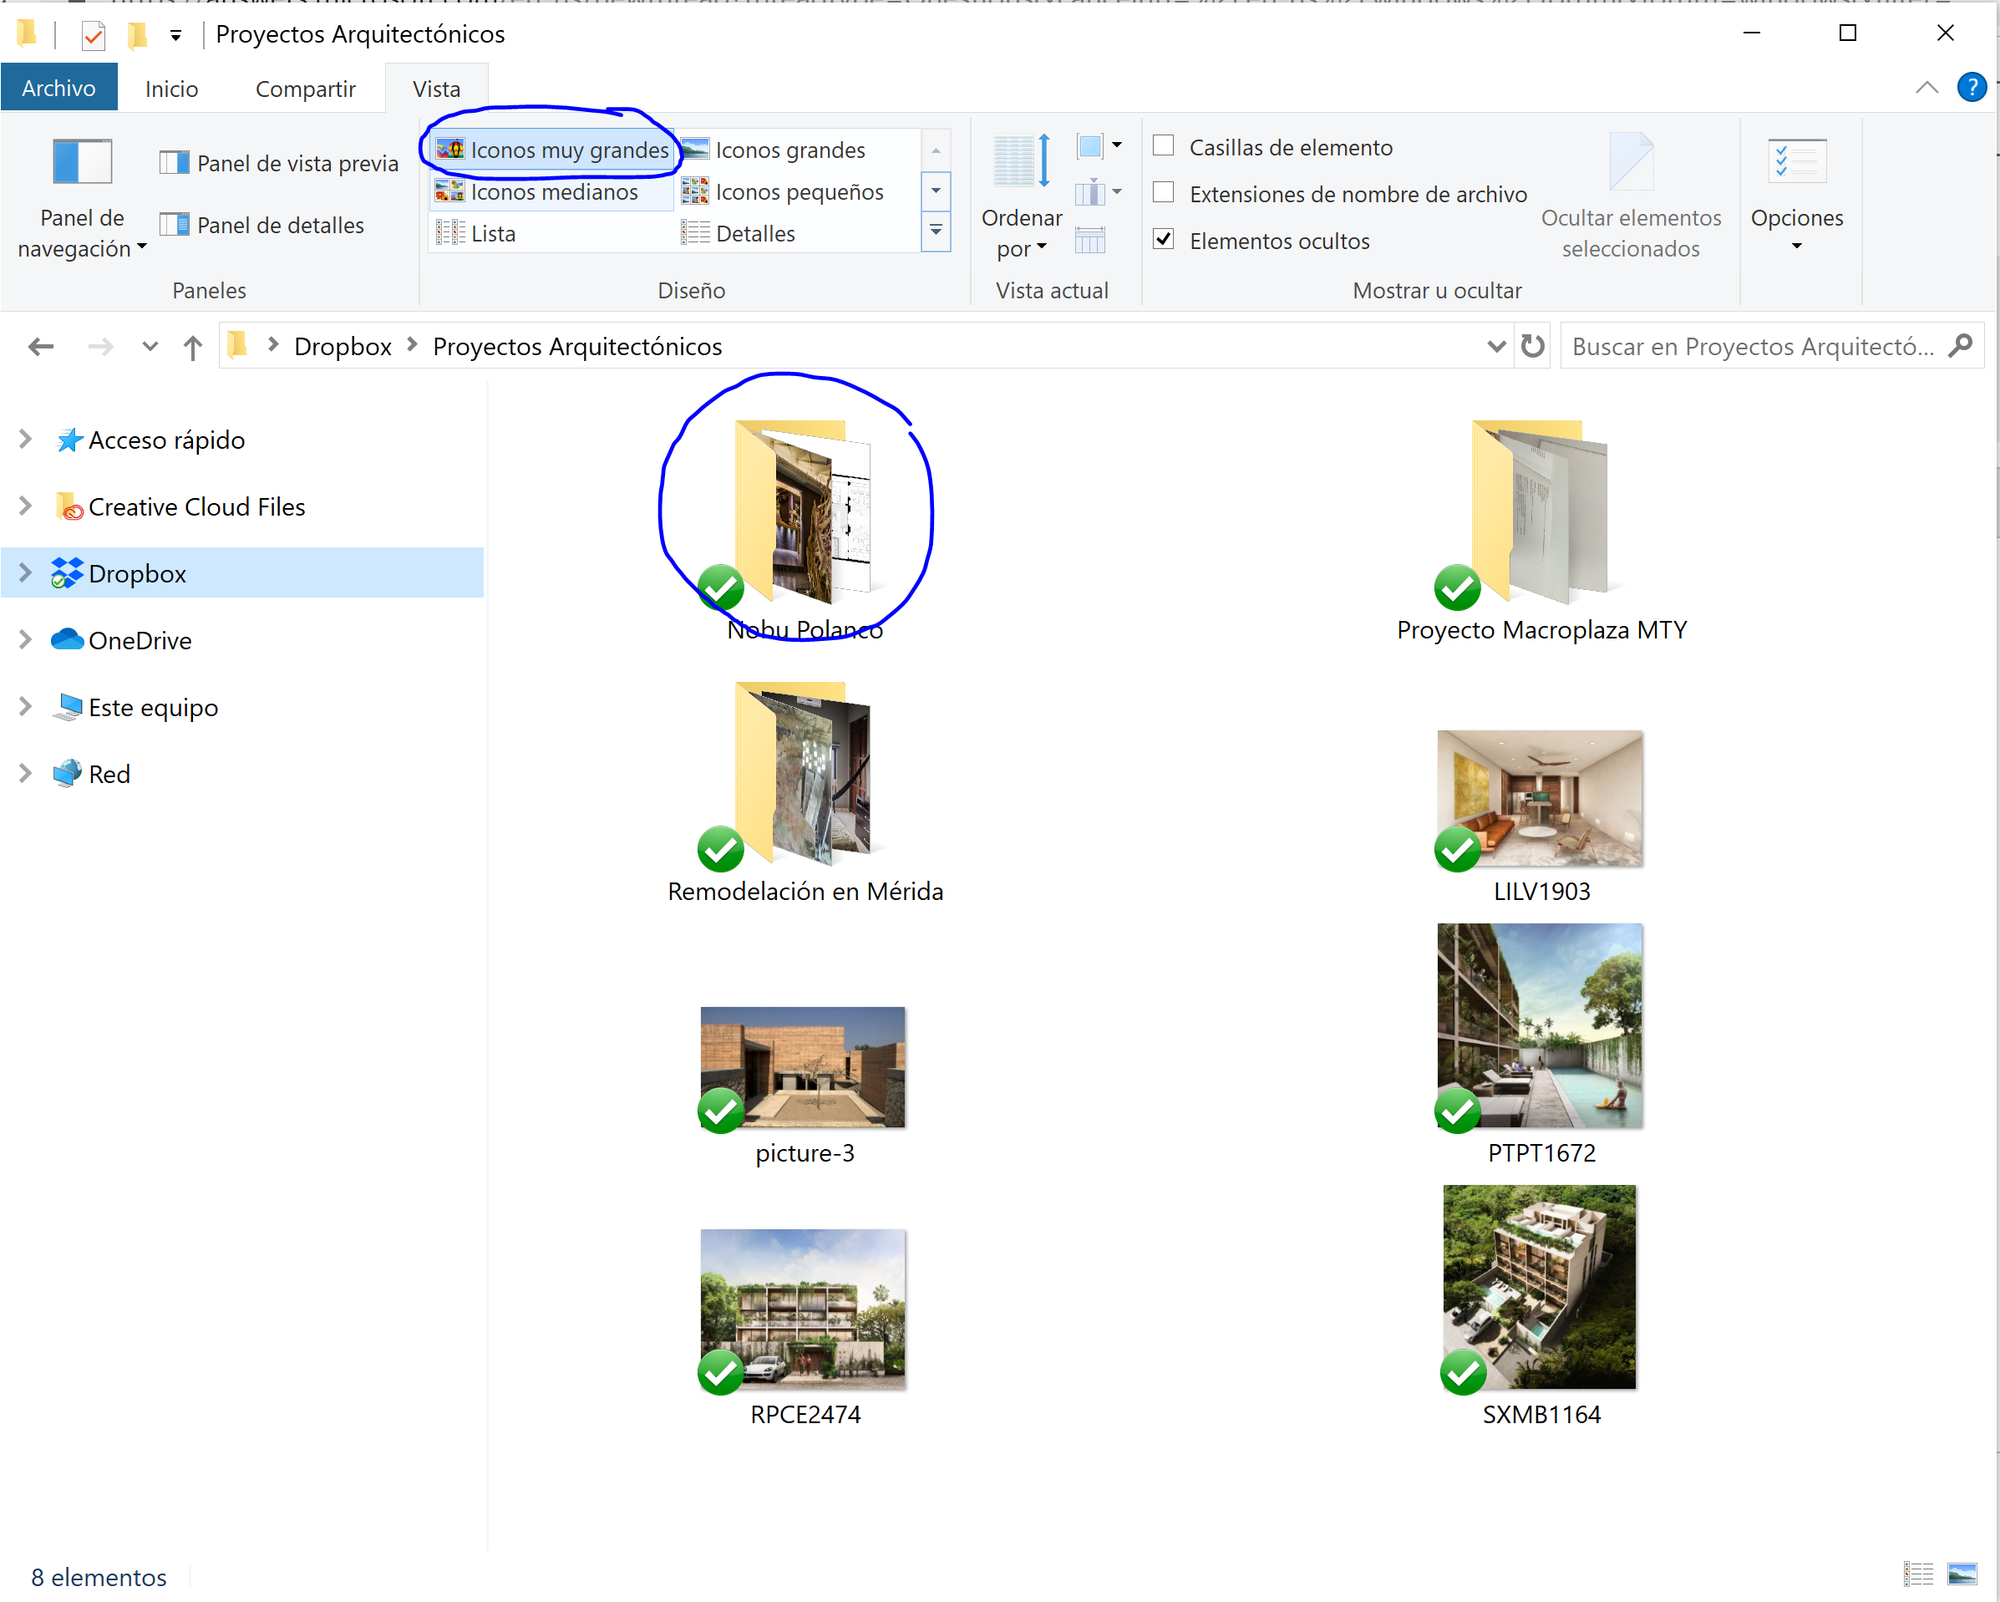 Icons not showing up as very large on Windows folder cbe571b9-7843-407b-bf43-d568daa21fb4?upload=true.png